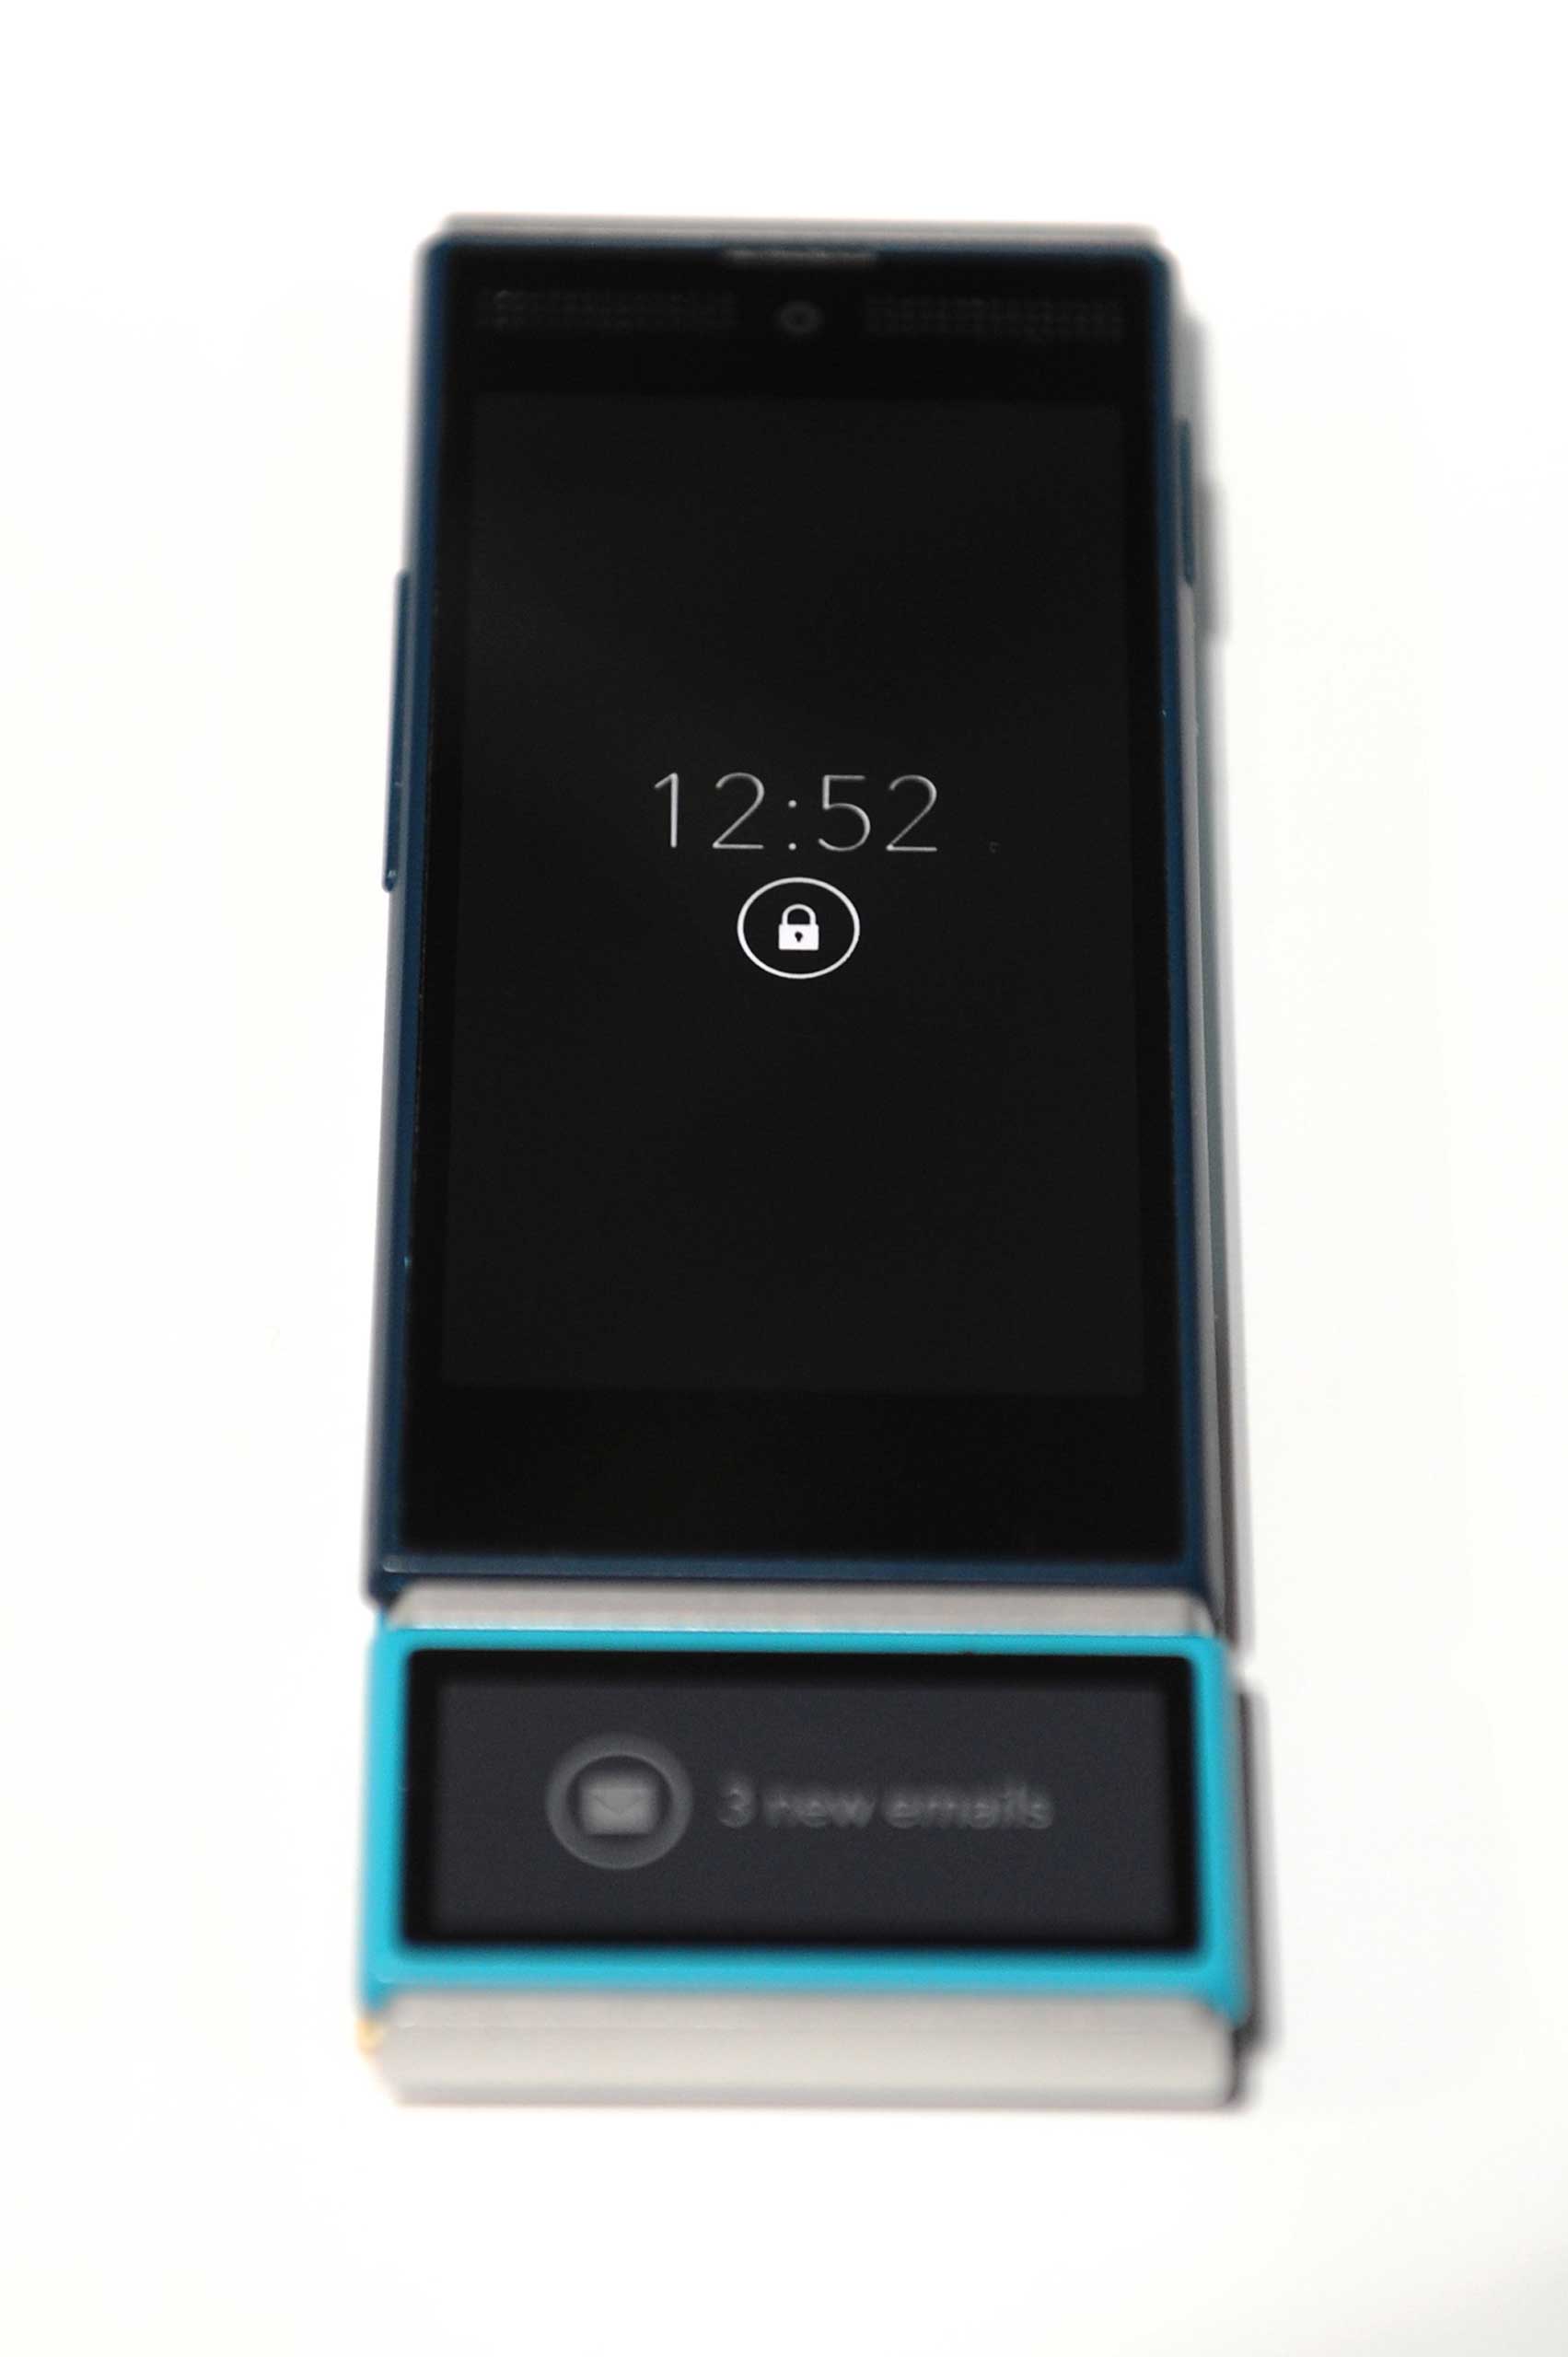 Project Ara
                              
                              Google's build-your-own-smartphone project allows users to customize their handsets to their own preferences, with the possibility of eliminating electronic waste by encouraging users to add hardware updates on their own terms. The team is working towards a limited market pilot in 2015.